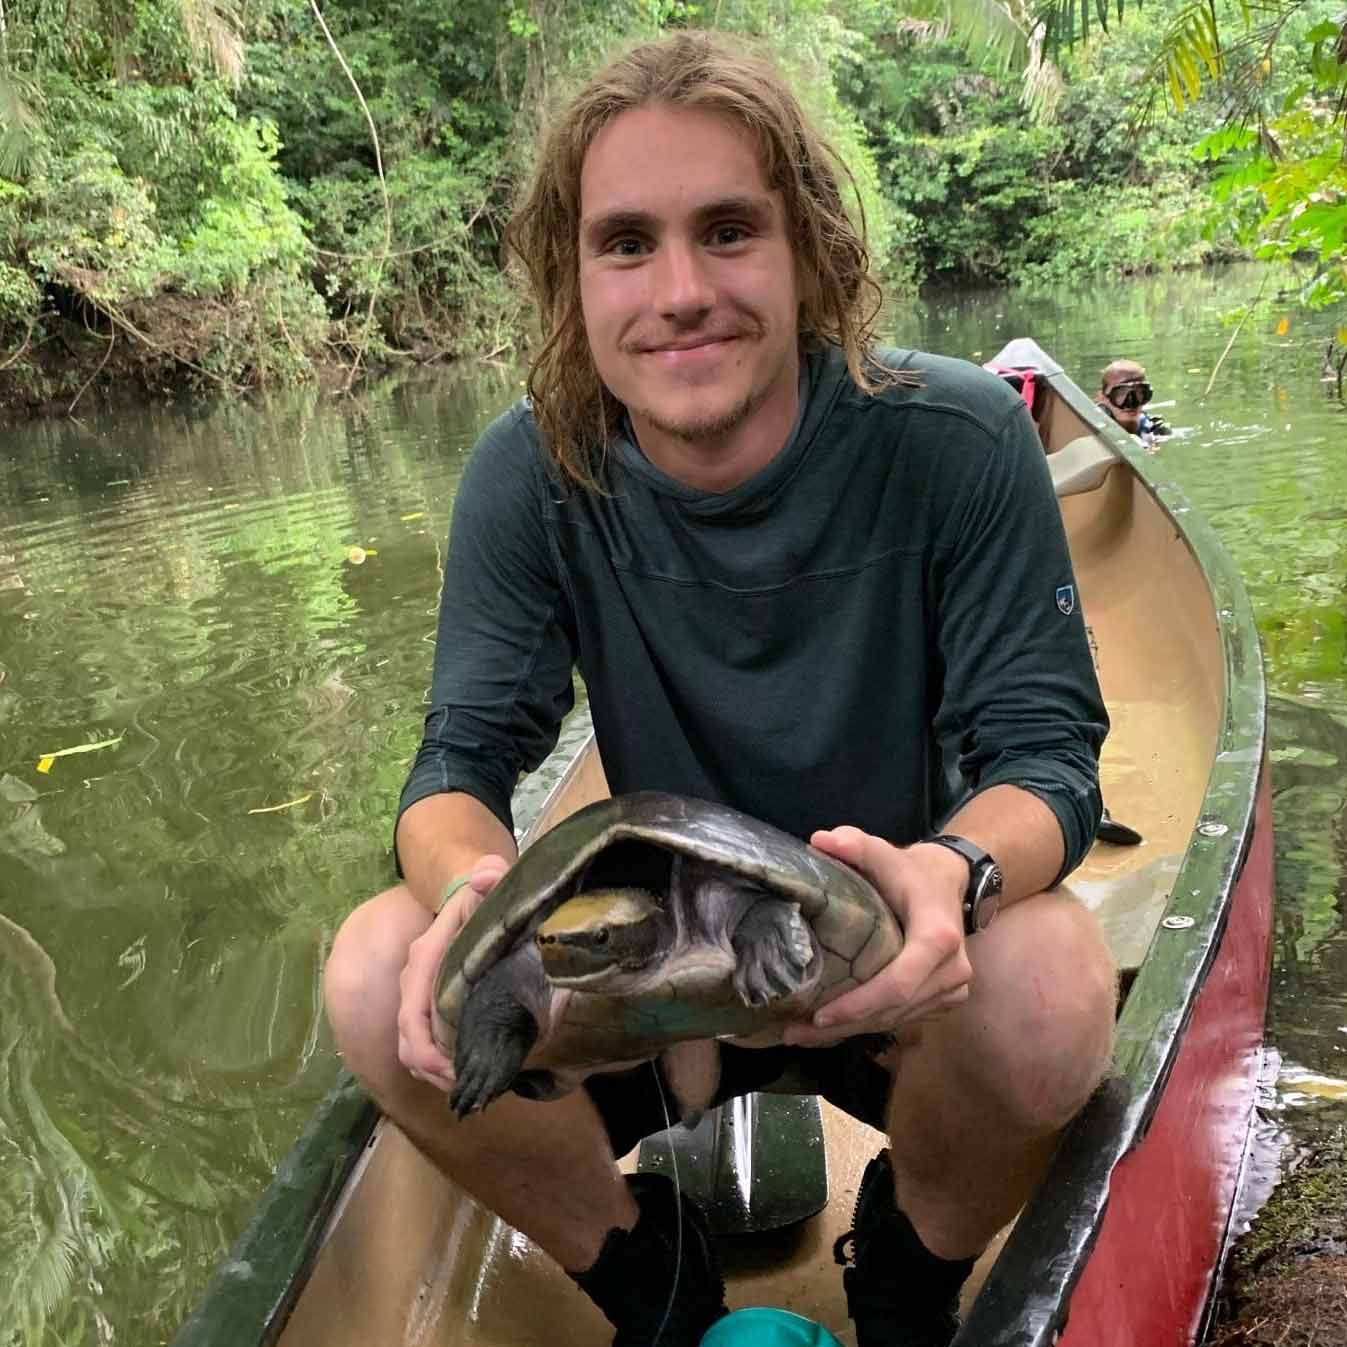 A biology student crouching in a canoe while holding up a turtle he caught during field research.